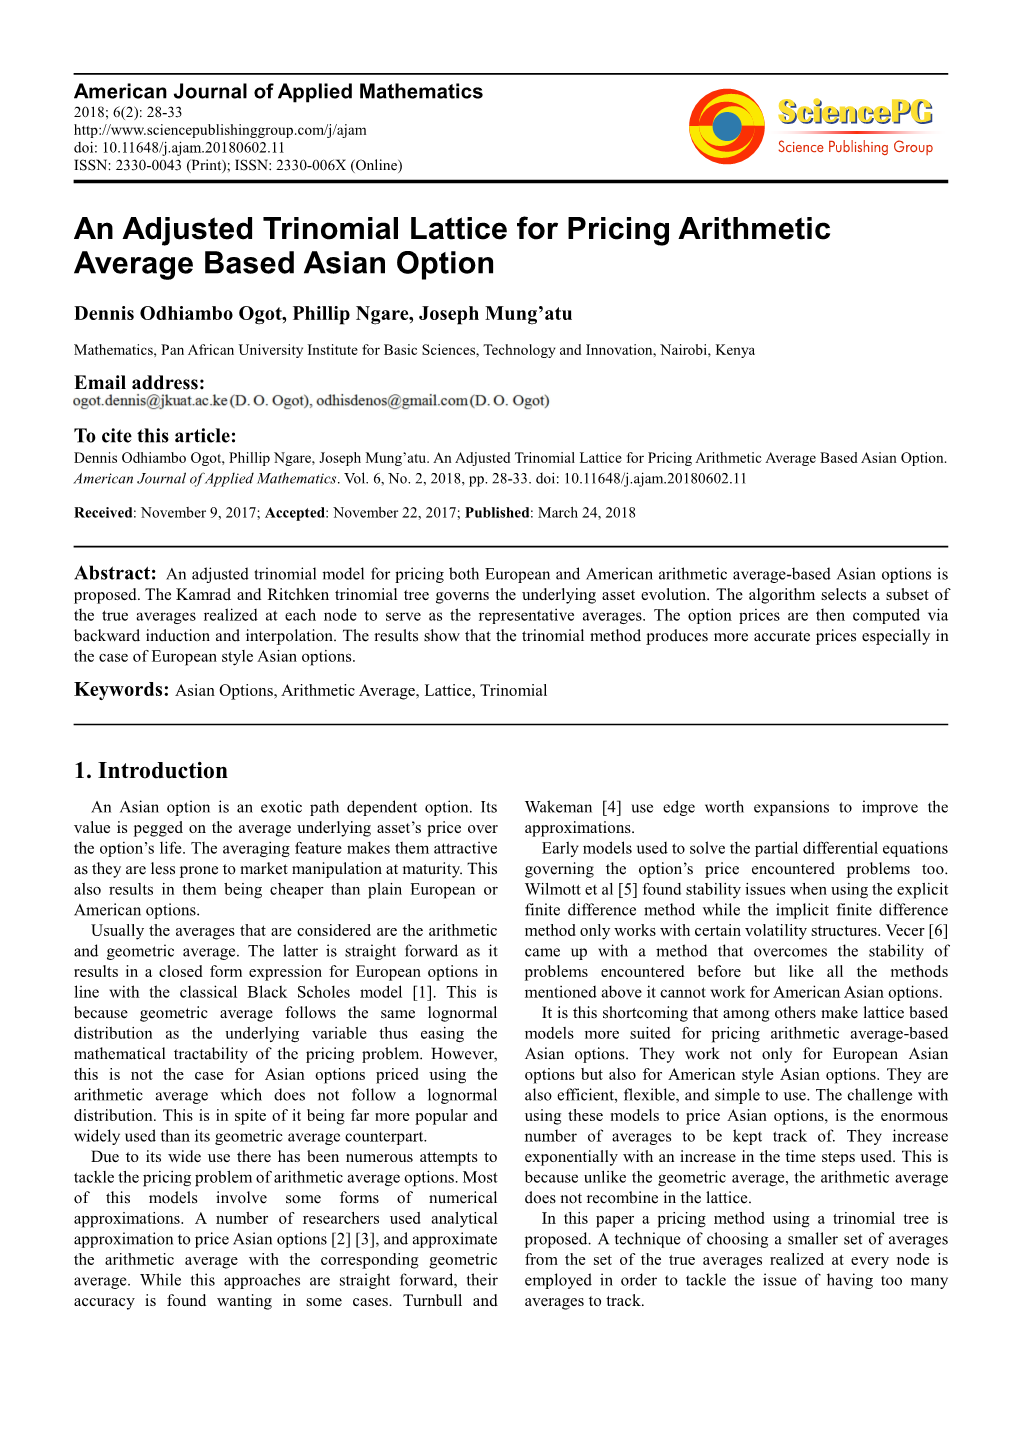 An Adjusted Trinomial Lattice for Pricing Arithmetic Average Based Asian Option